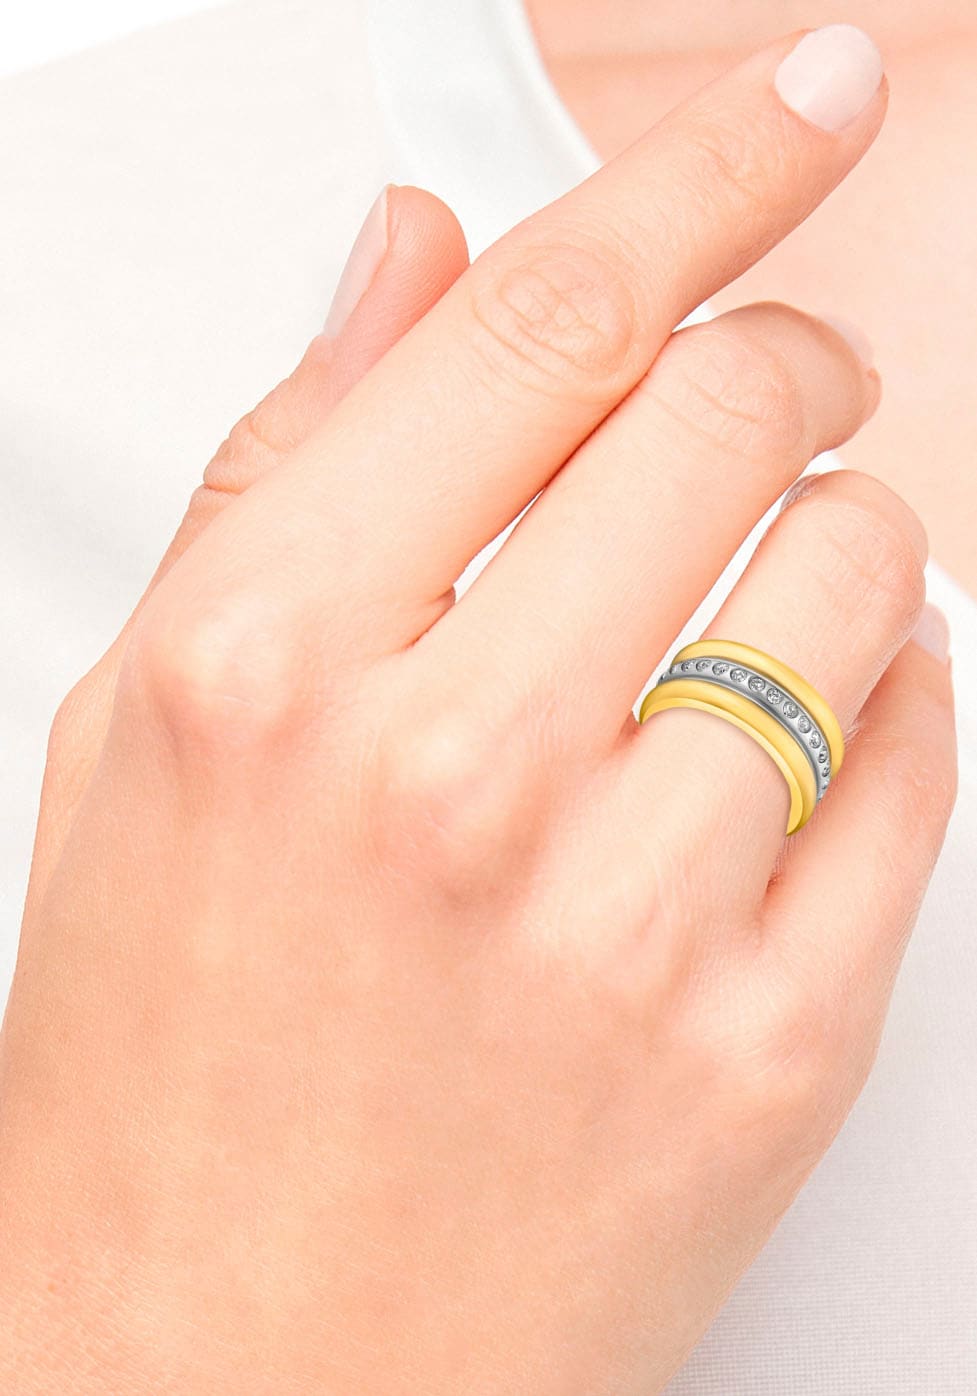 (synth.) bei s.Oliver Fingerring ♕ Zirkonia mit »2036837/-38/-39/-40«,